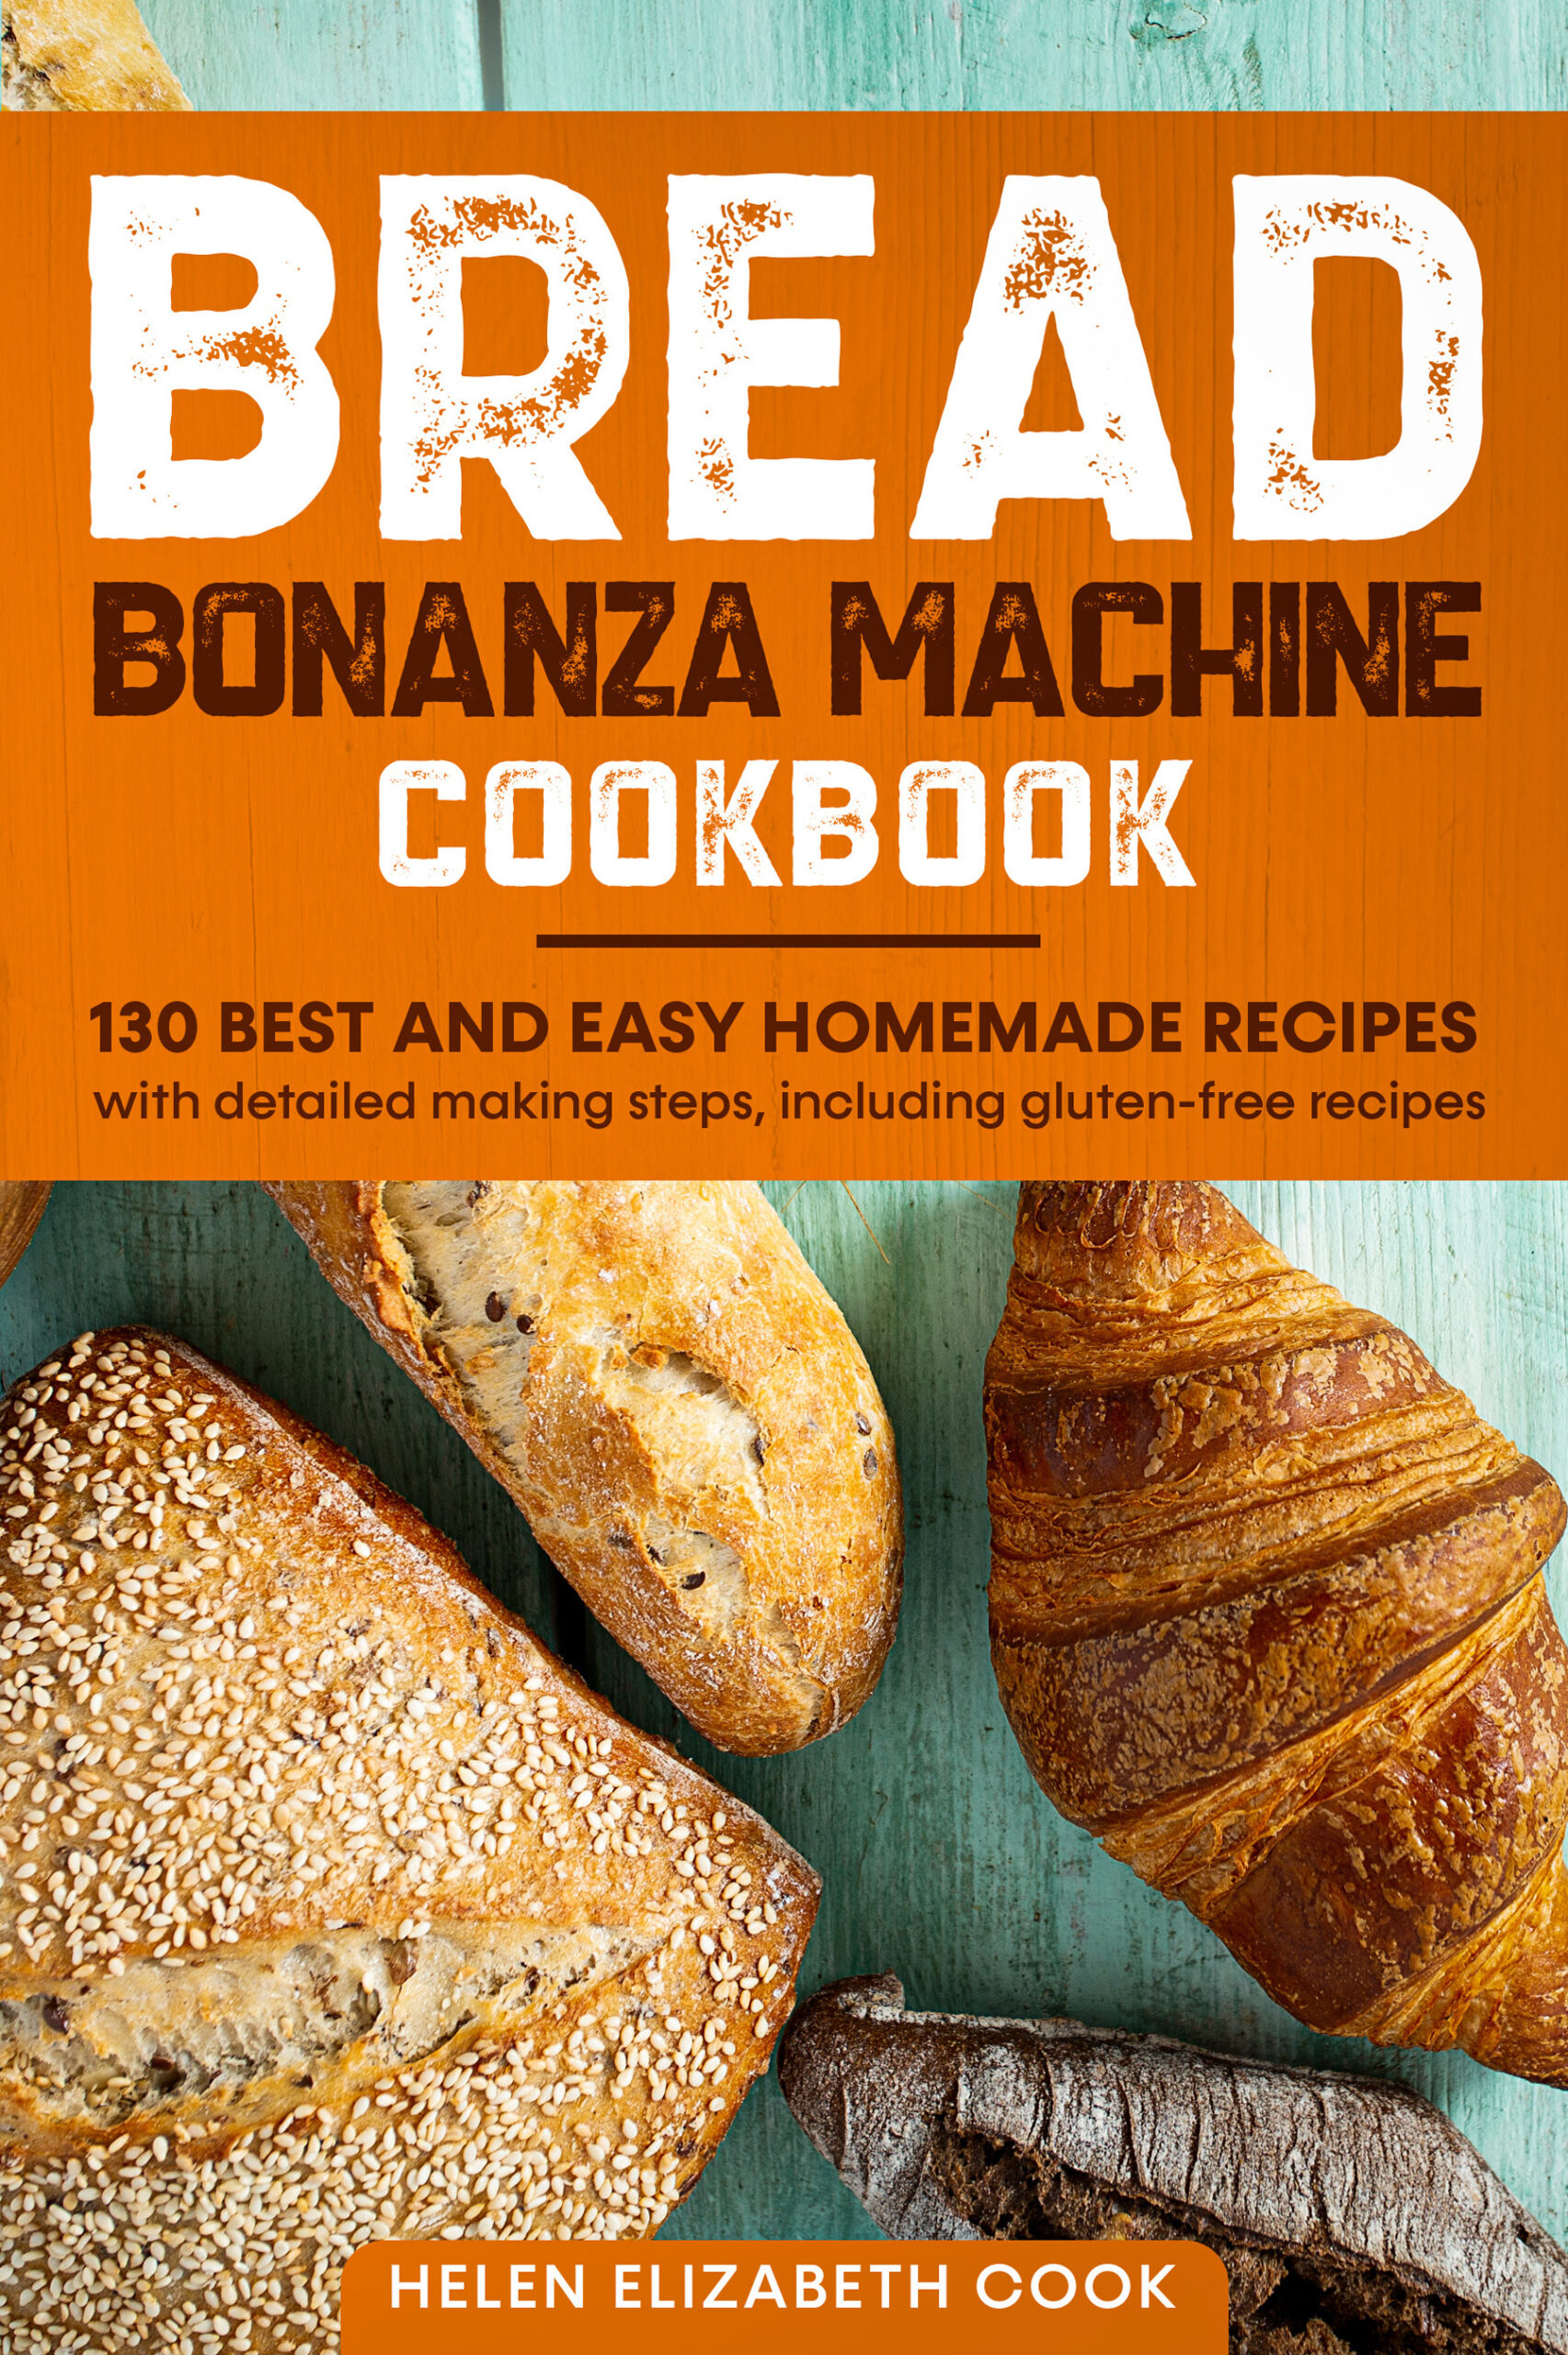 FREE: Bread Bonanza Machine Cookbook: 130 best and easy homemade recipes with detailed making steps, including gluten-free recipes by Helen Elizabeth Cook